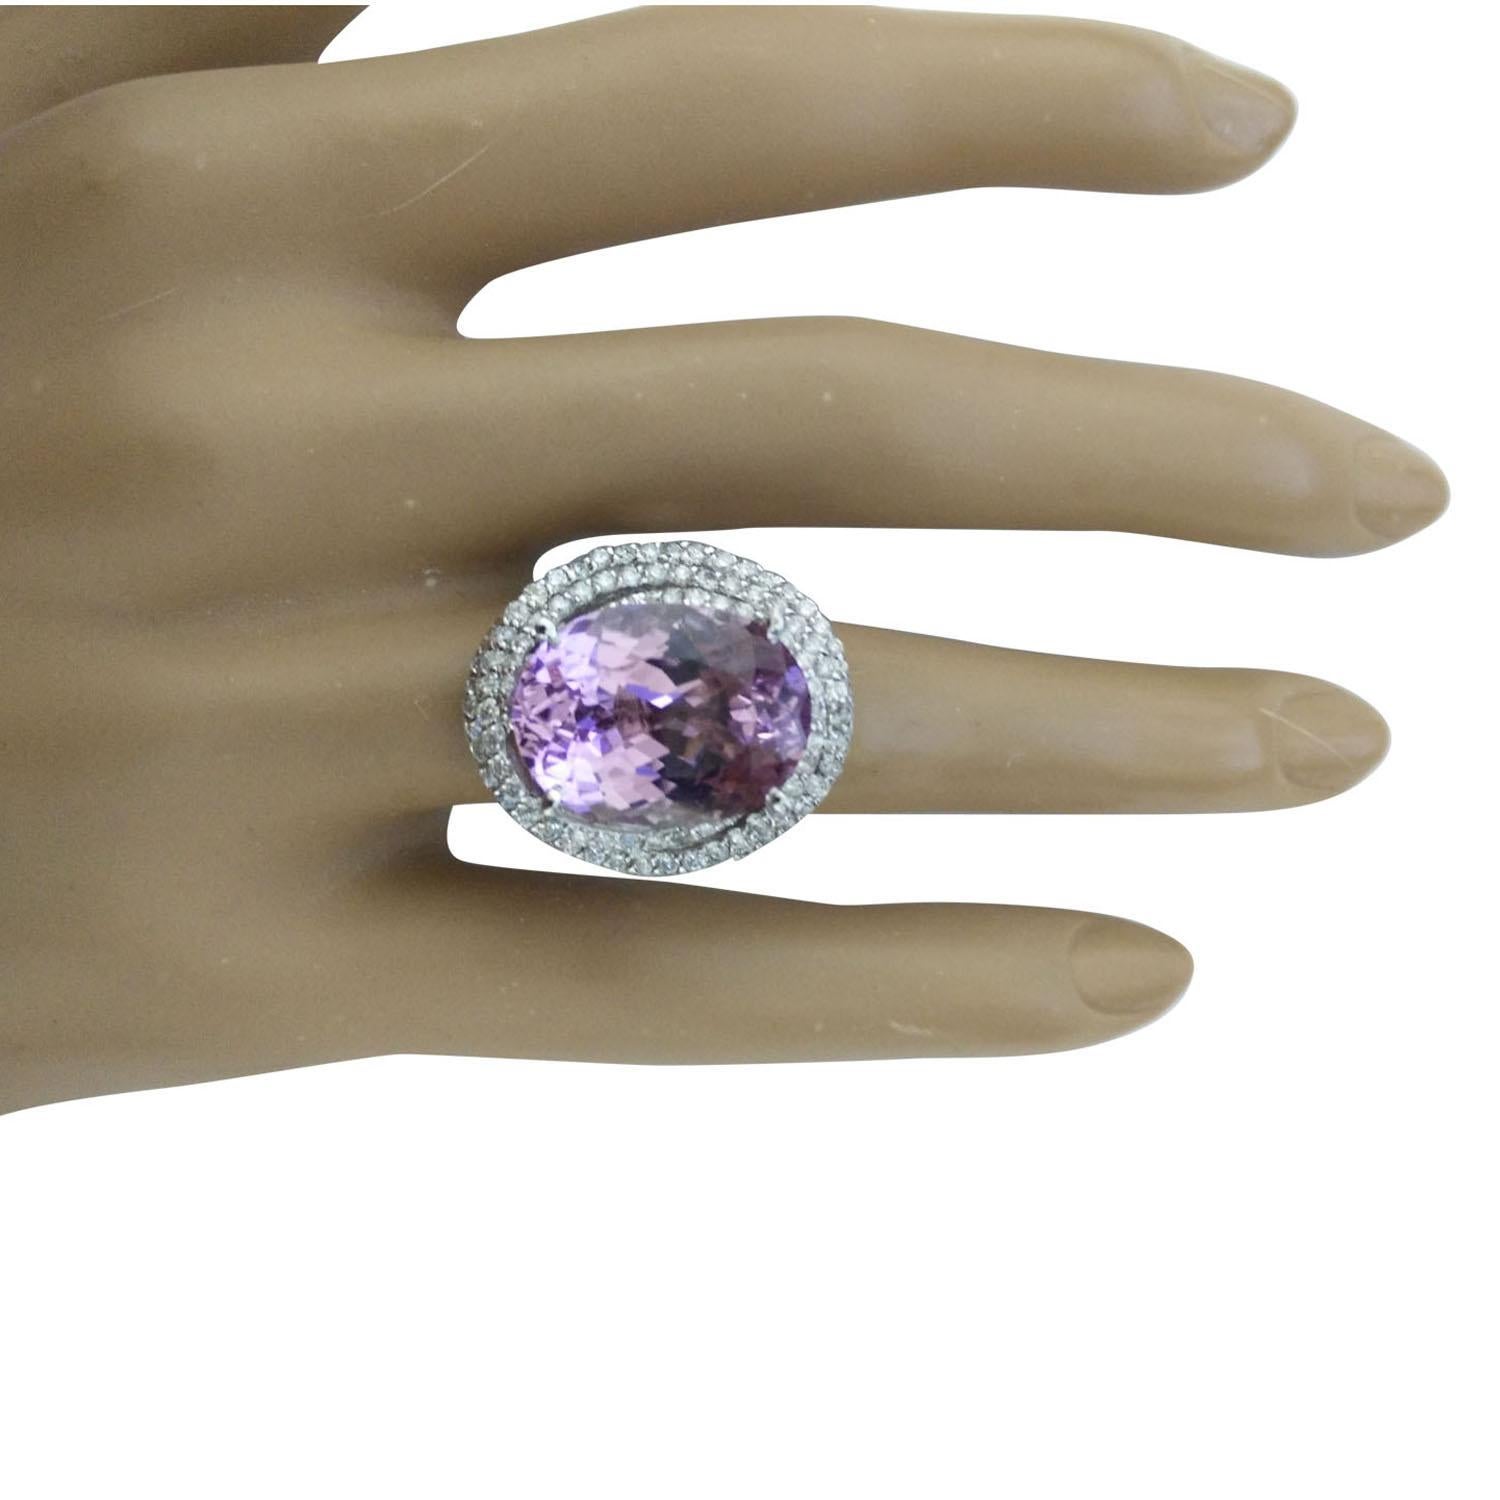 15.42 Carat Natural Kunzite 14 Karat Solid White Gold Diamond Ring
Stamped: 14K 
Ring Size: 7 
Total Ring Weight: 10.9 Grams 
Kunzite Weight: 14.22 Carat (16.00x12.00 Millimeter) 
Diamond Weight: 1.20 Carat (F-G Color, VS2-SI1 Clarity)
Face